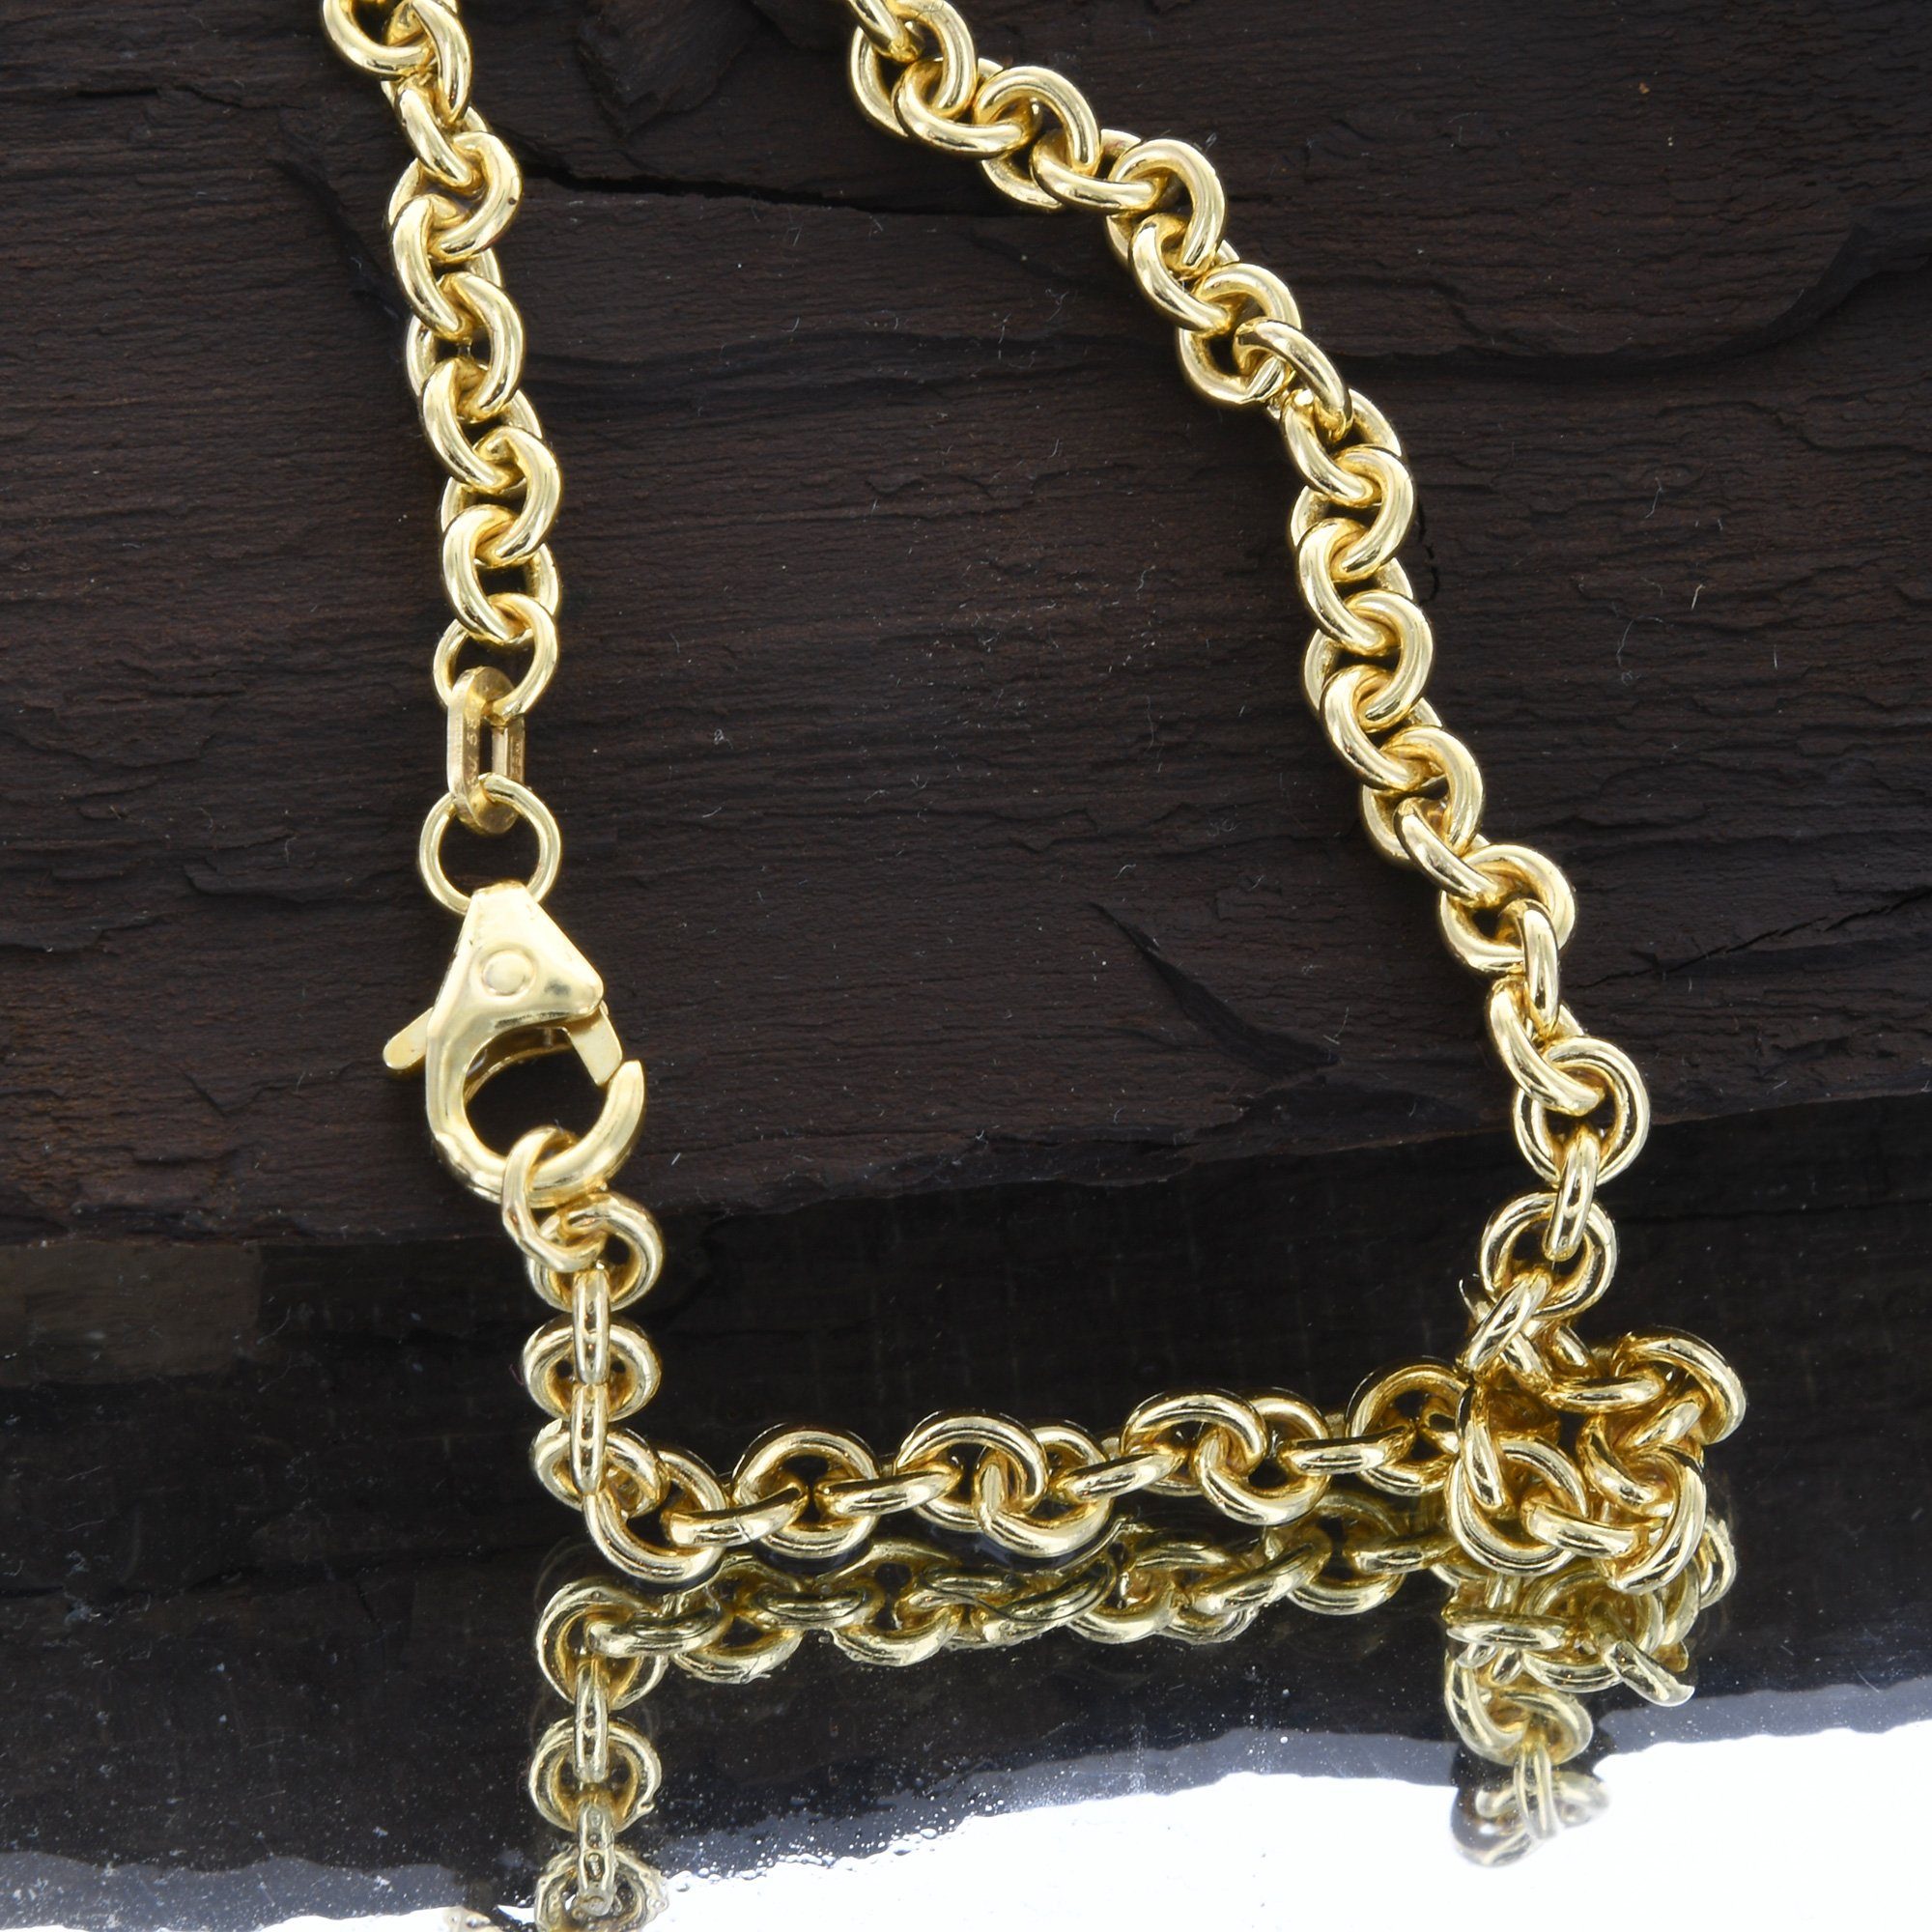 Made Goldkette, HOPLO in Germany